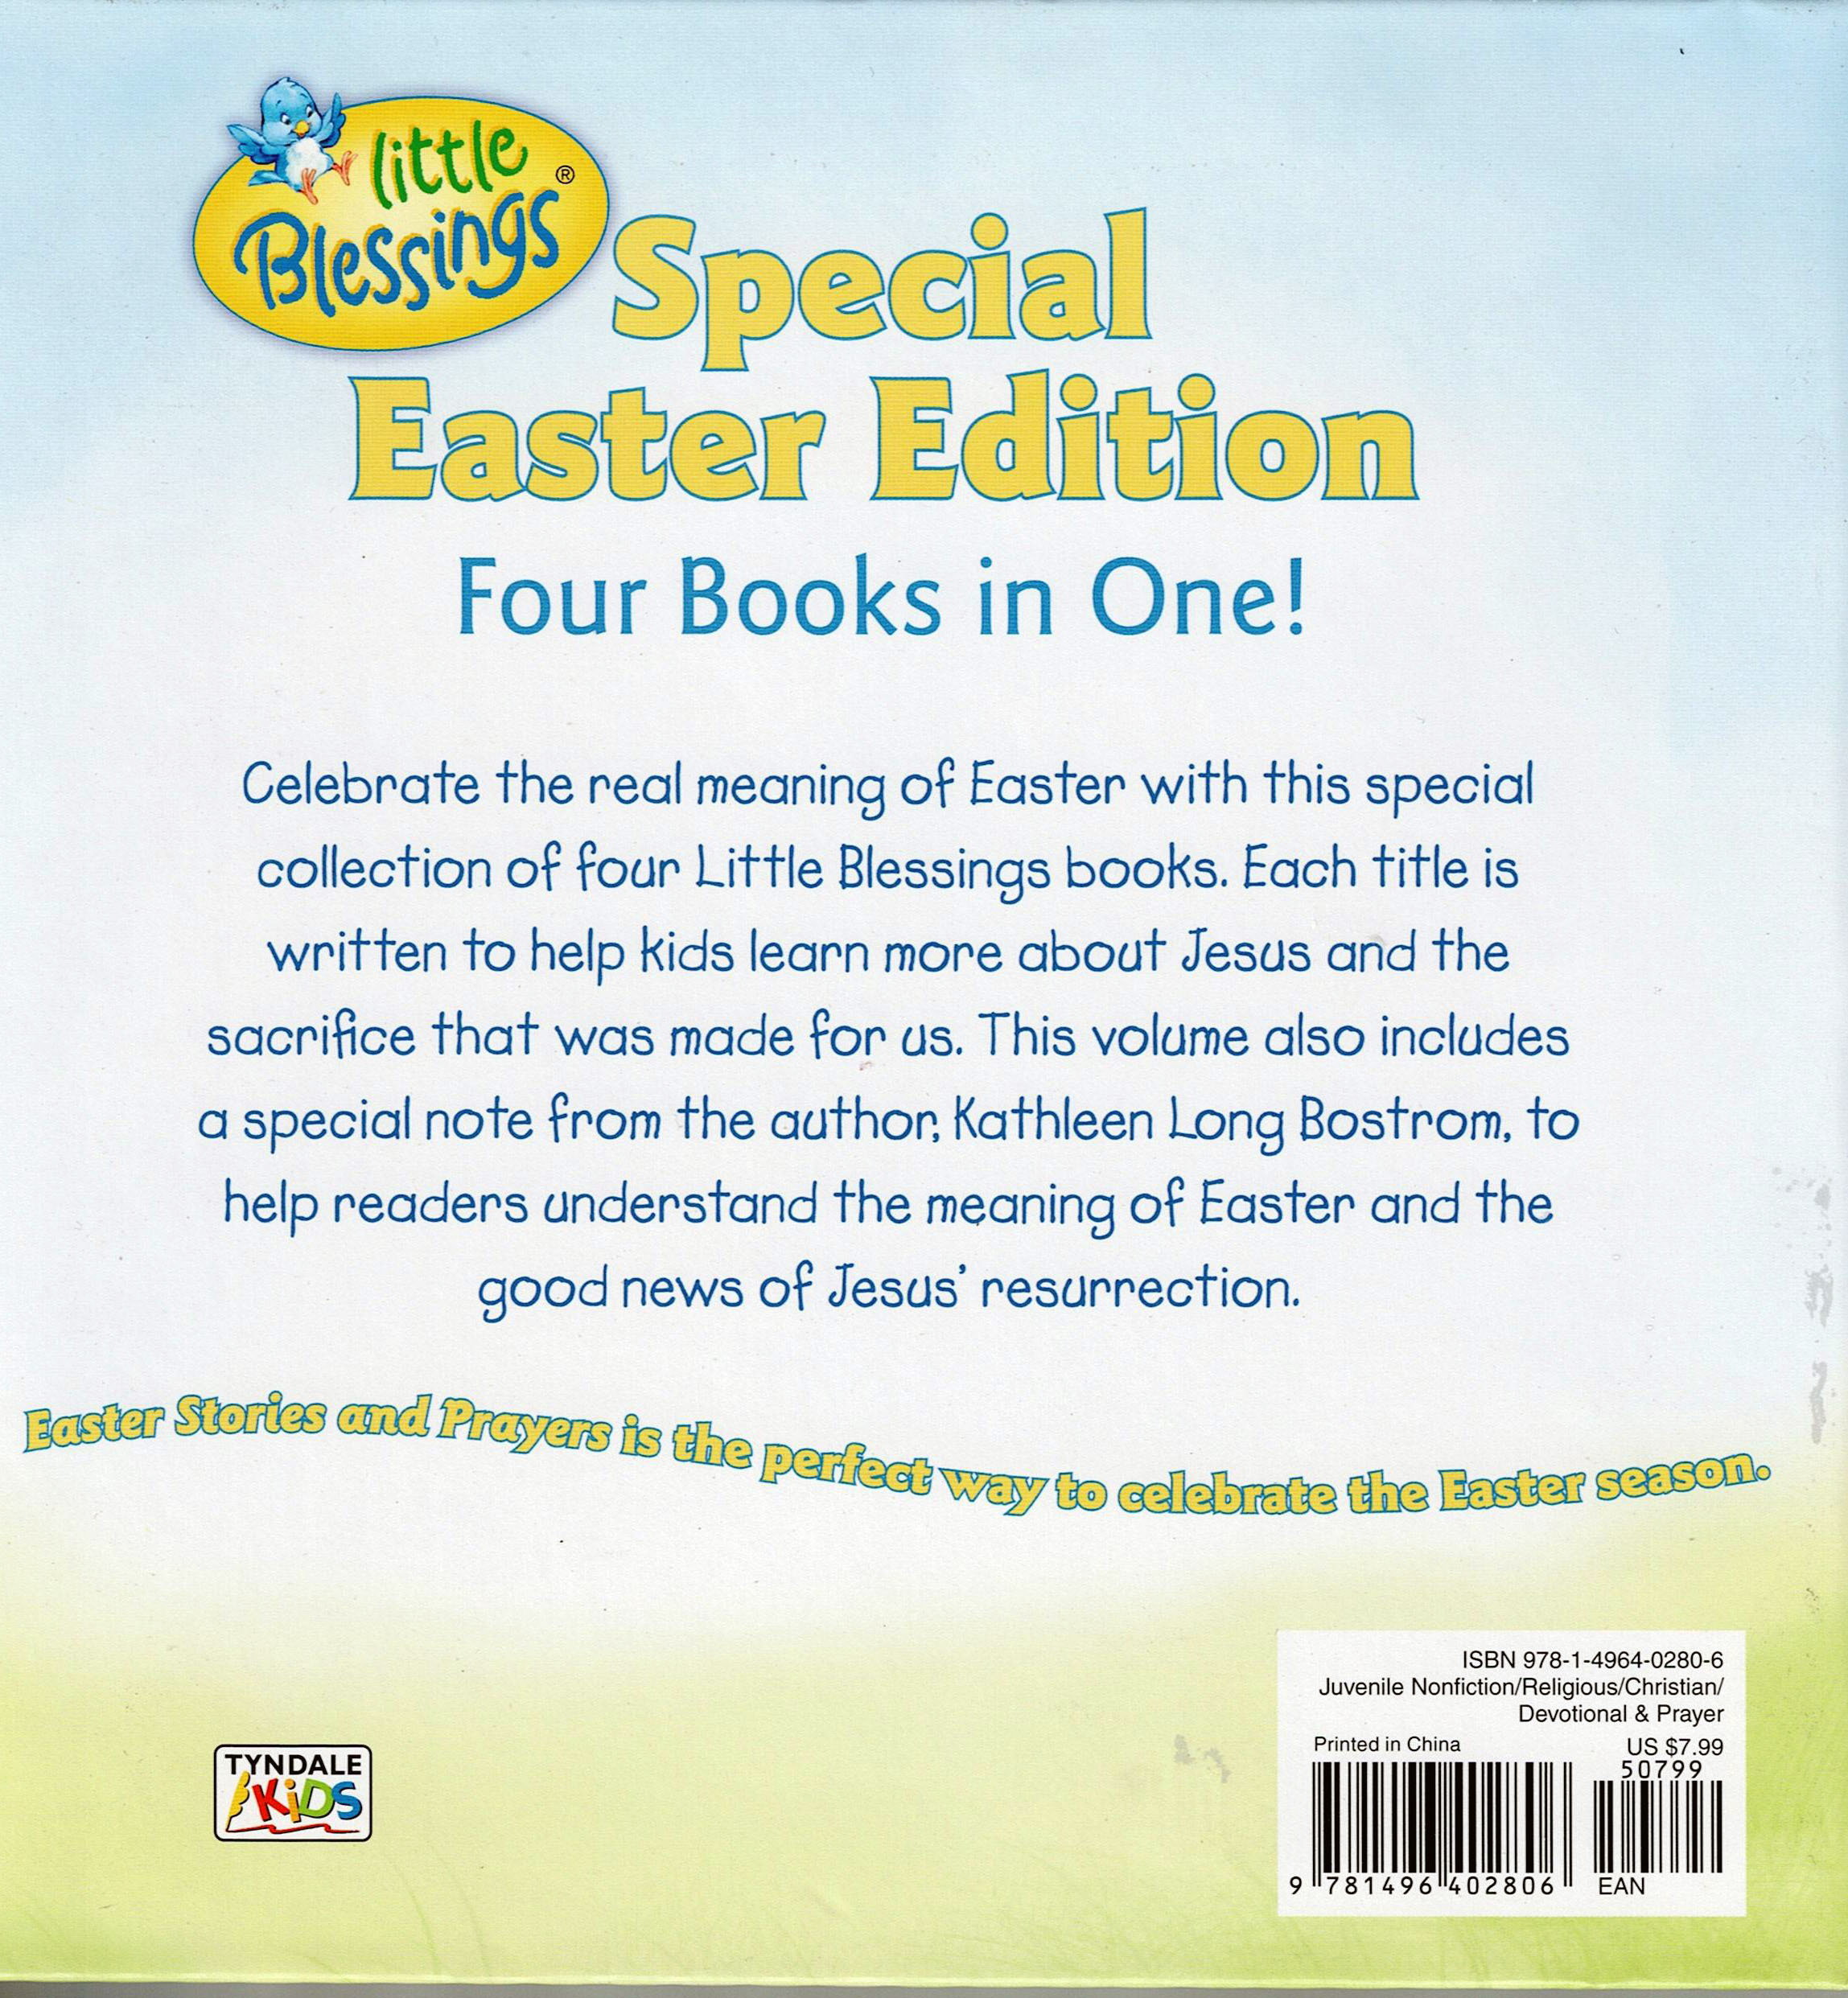 Little Blessings Easter Stories and Prayers - 4 books in 1